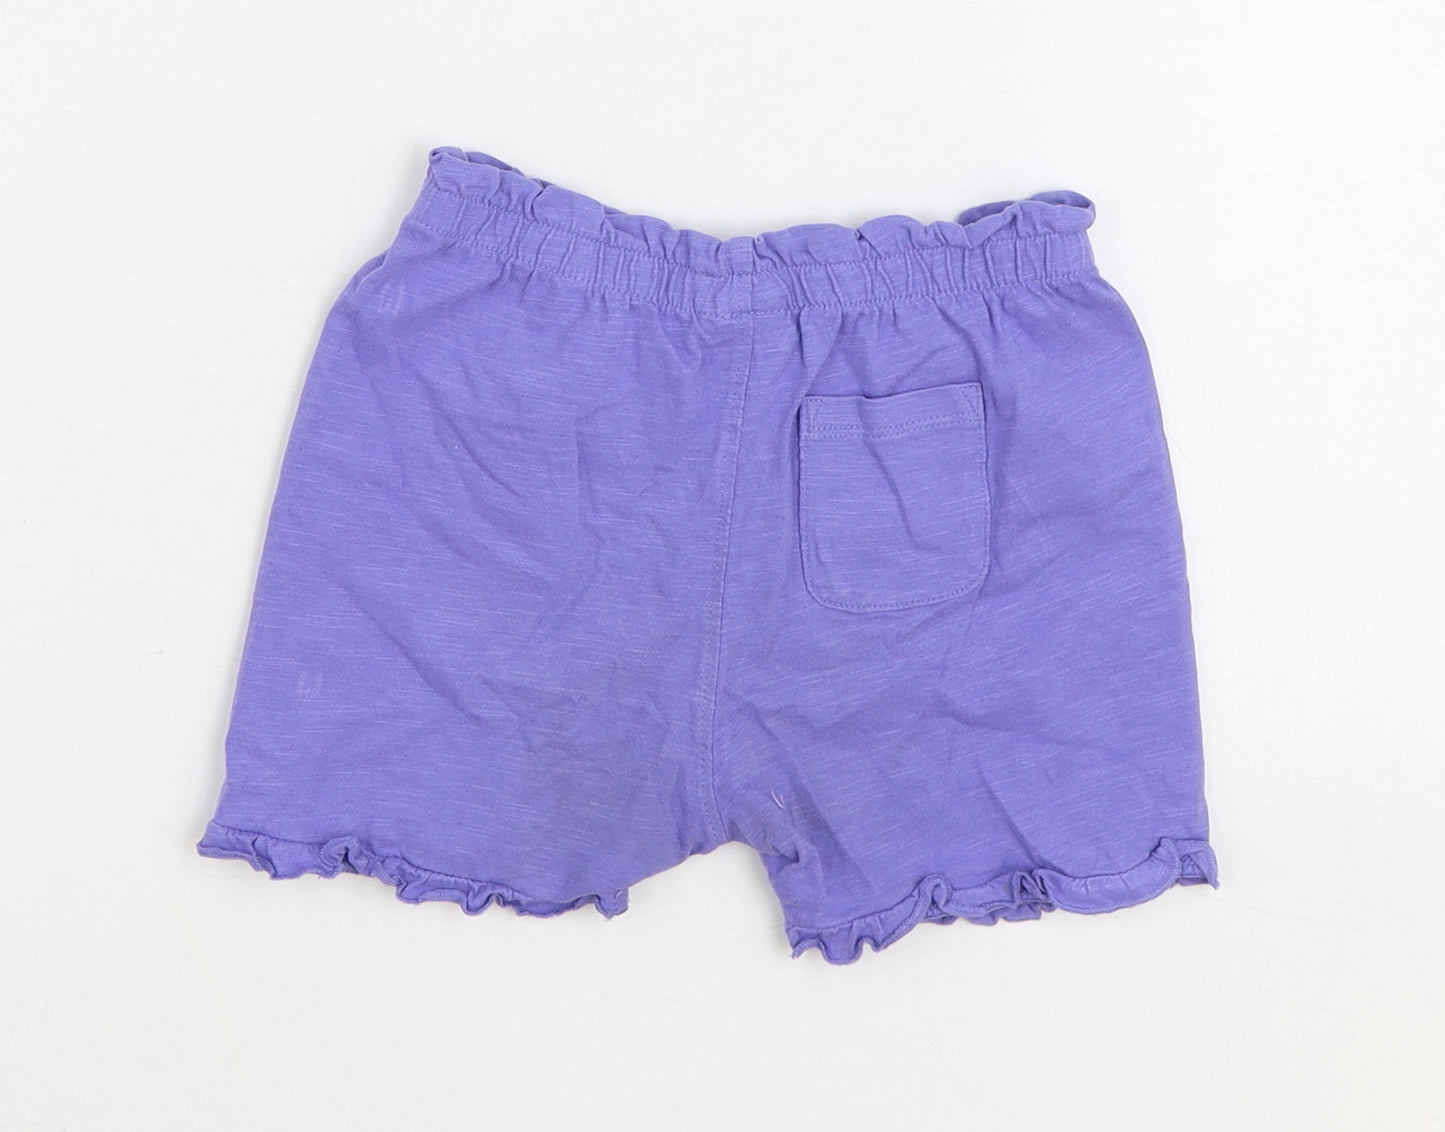 Marks and Spencer Girls Purple Cotton Sweat Shorts Size 2-3 Years Regular - Smile